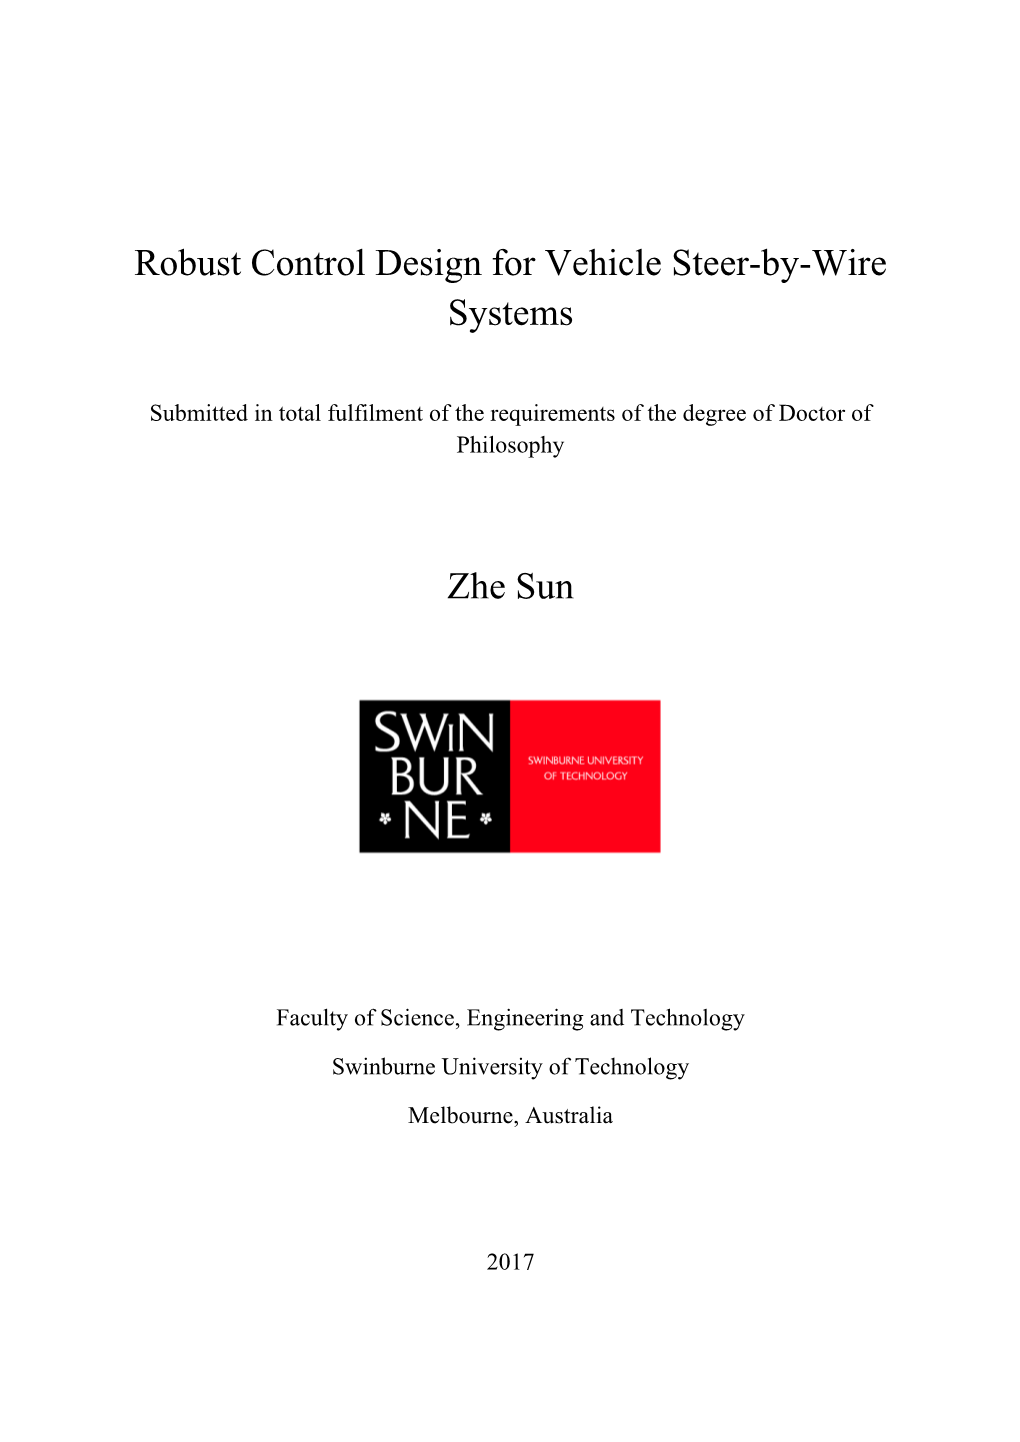 Robust Control Design for Vehicle Steer-By-Wire Systems